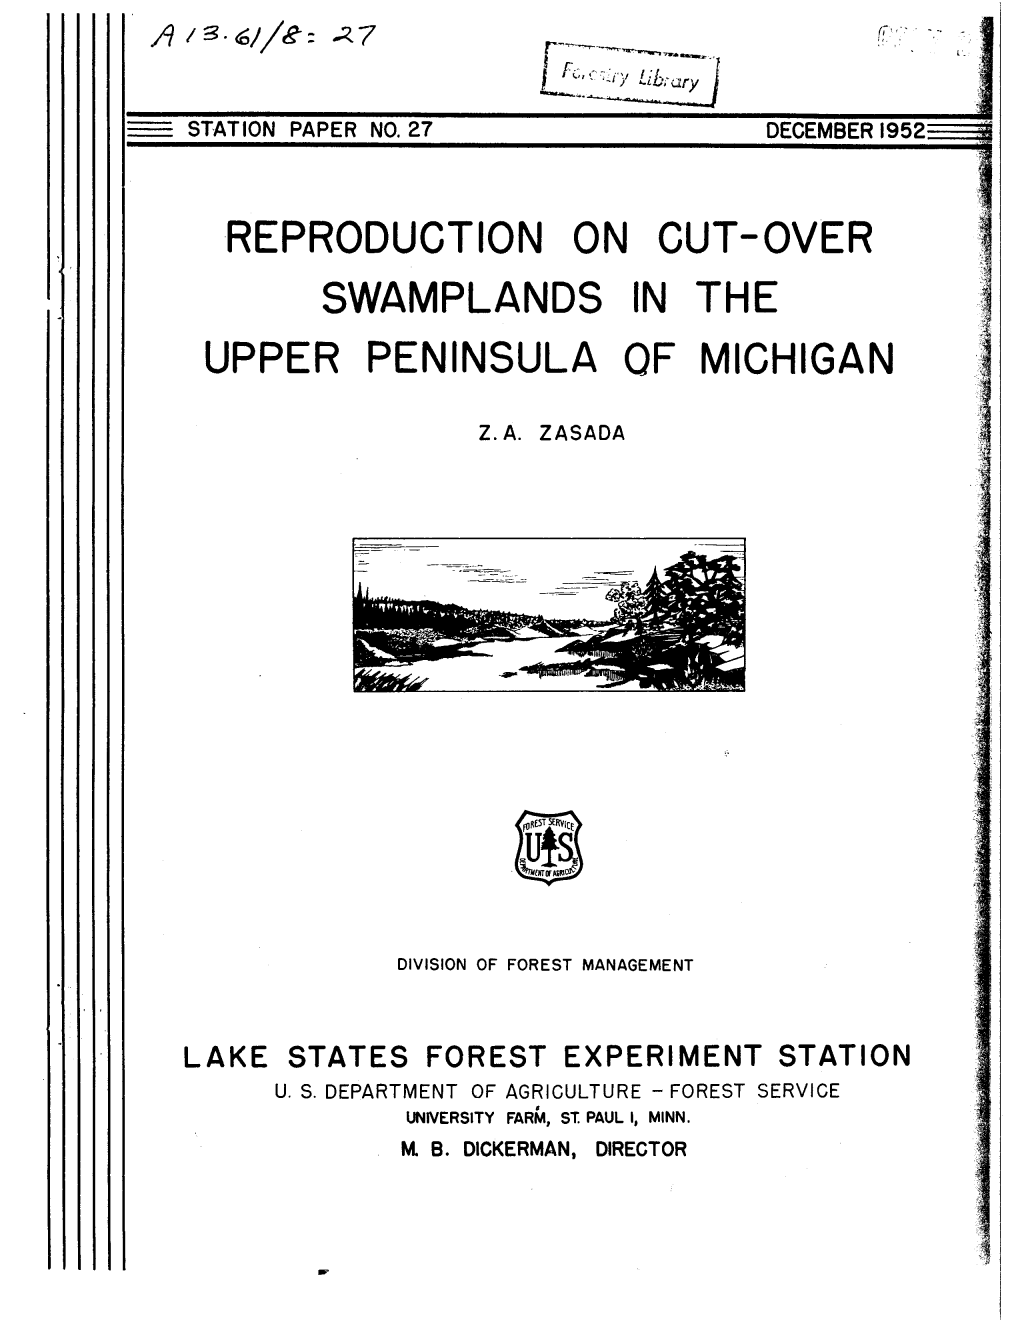 Reproduction on Cut-Over Swamplands in the Upper Peninsula of Michigan